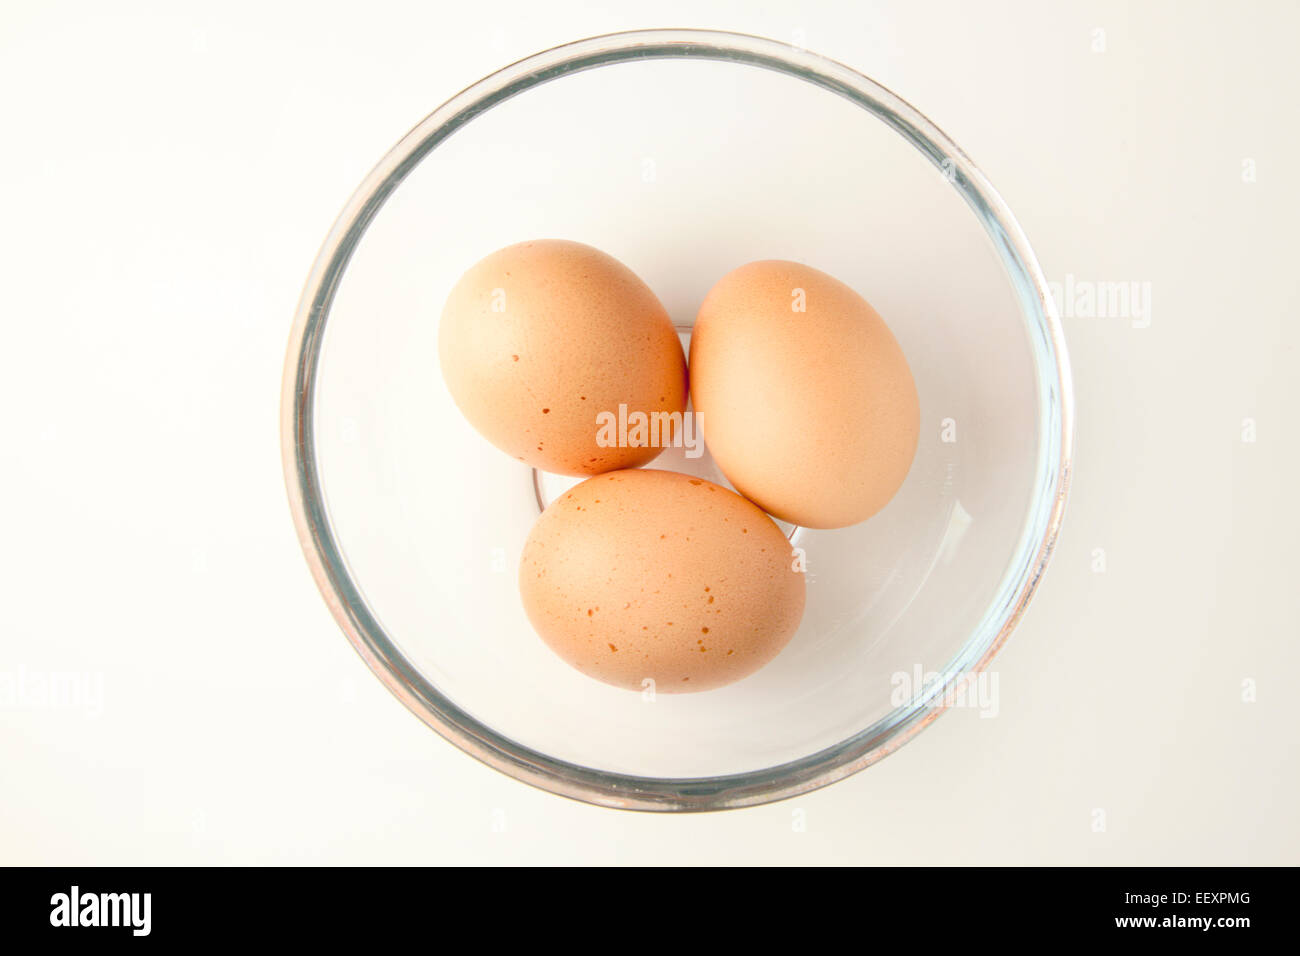 Three Brown Free Range Eggs in a Glass Bowl Stock Photo